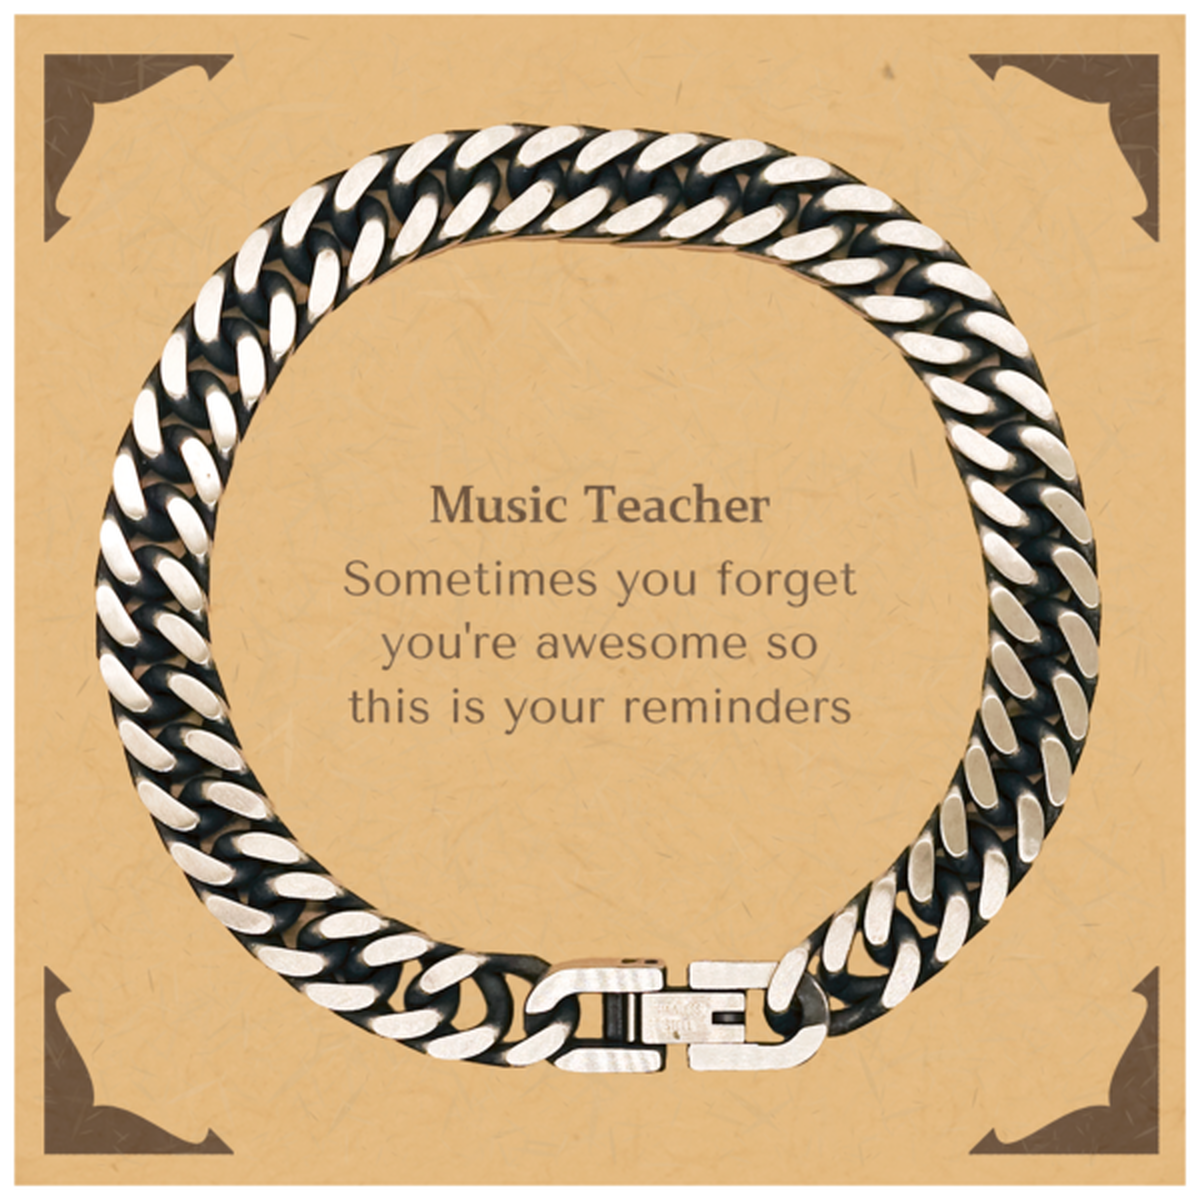 Sentimental Music Teacher Cuban Link Chain Bracelet, Music Teacher Sometimes you forget you're awesome so this is your reminders, Graduation Christmas Birthday Gifts for Music Teacher, Men, Women, Coworkers